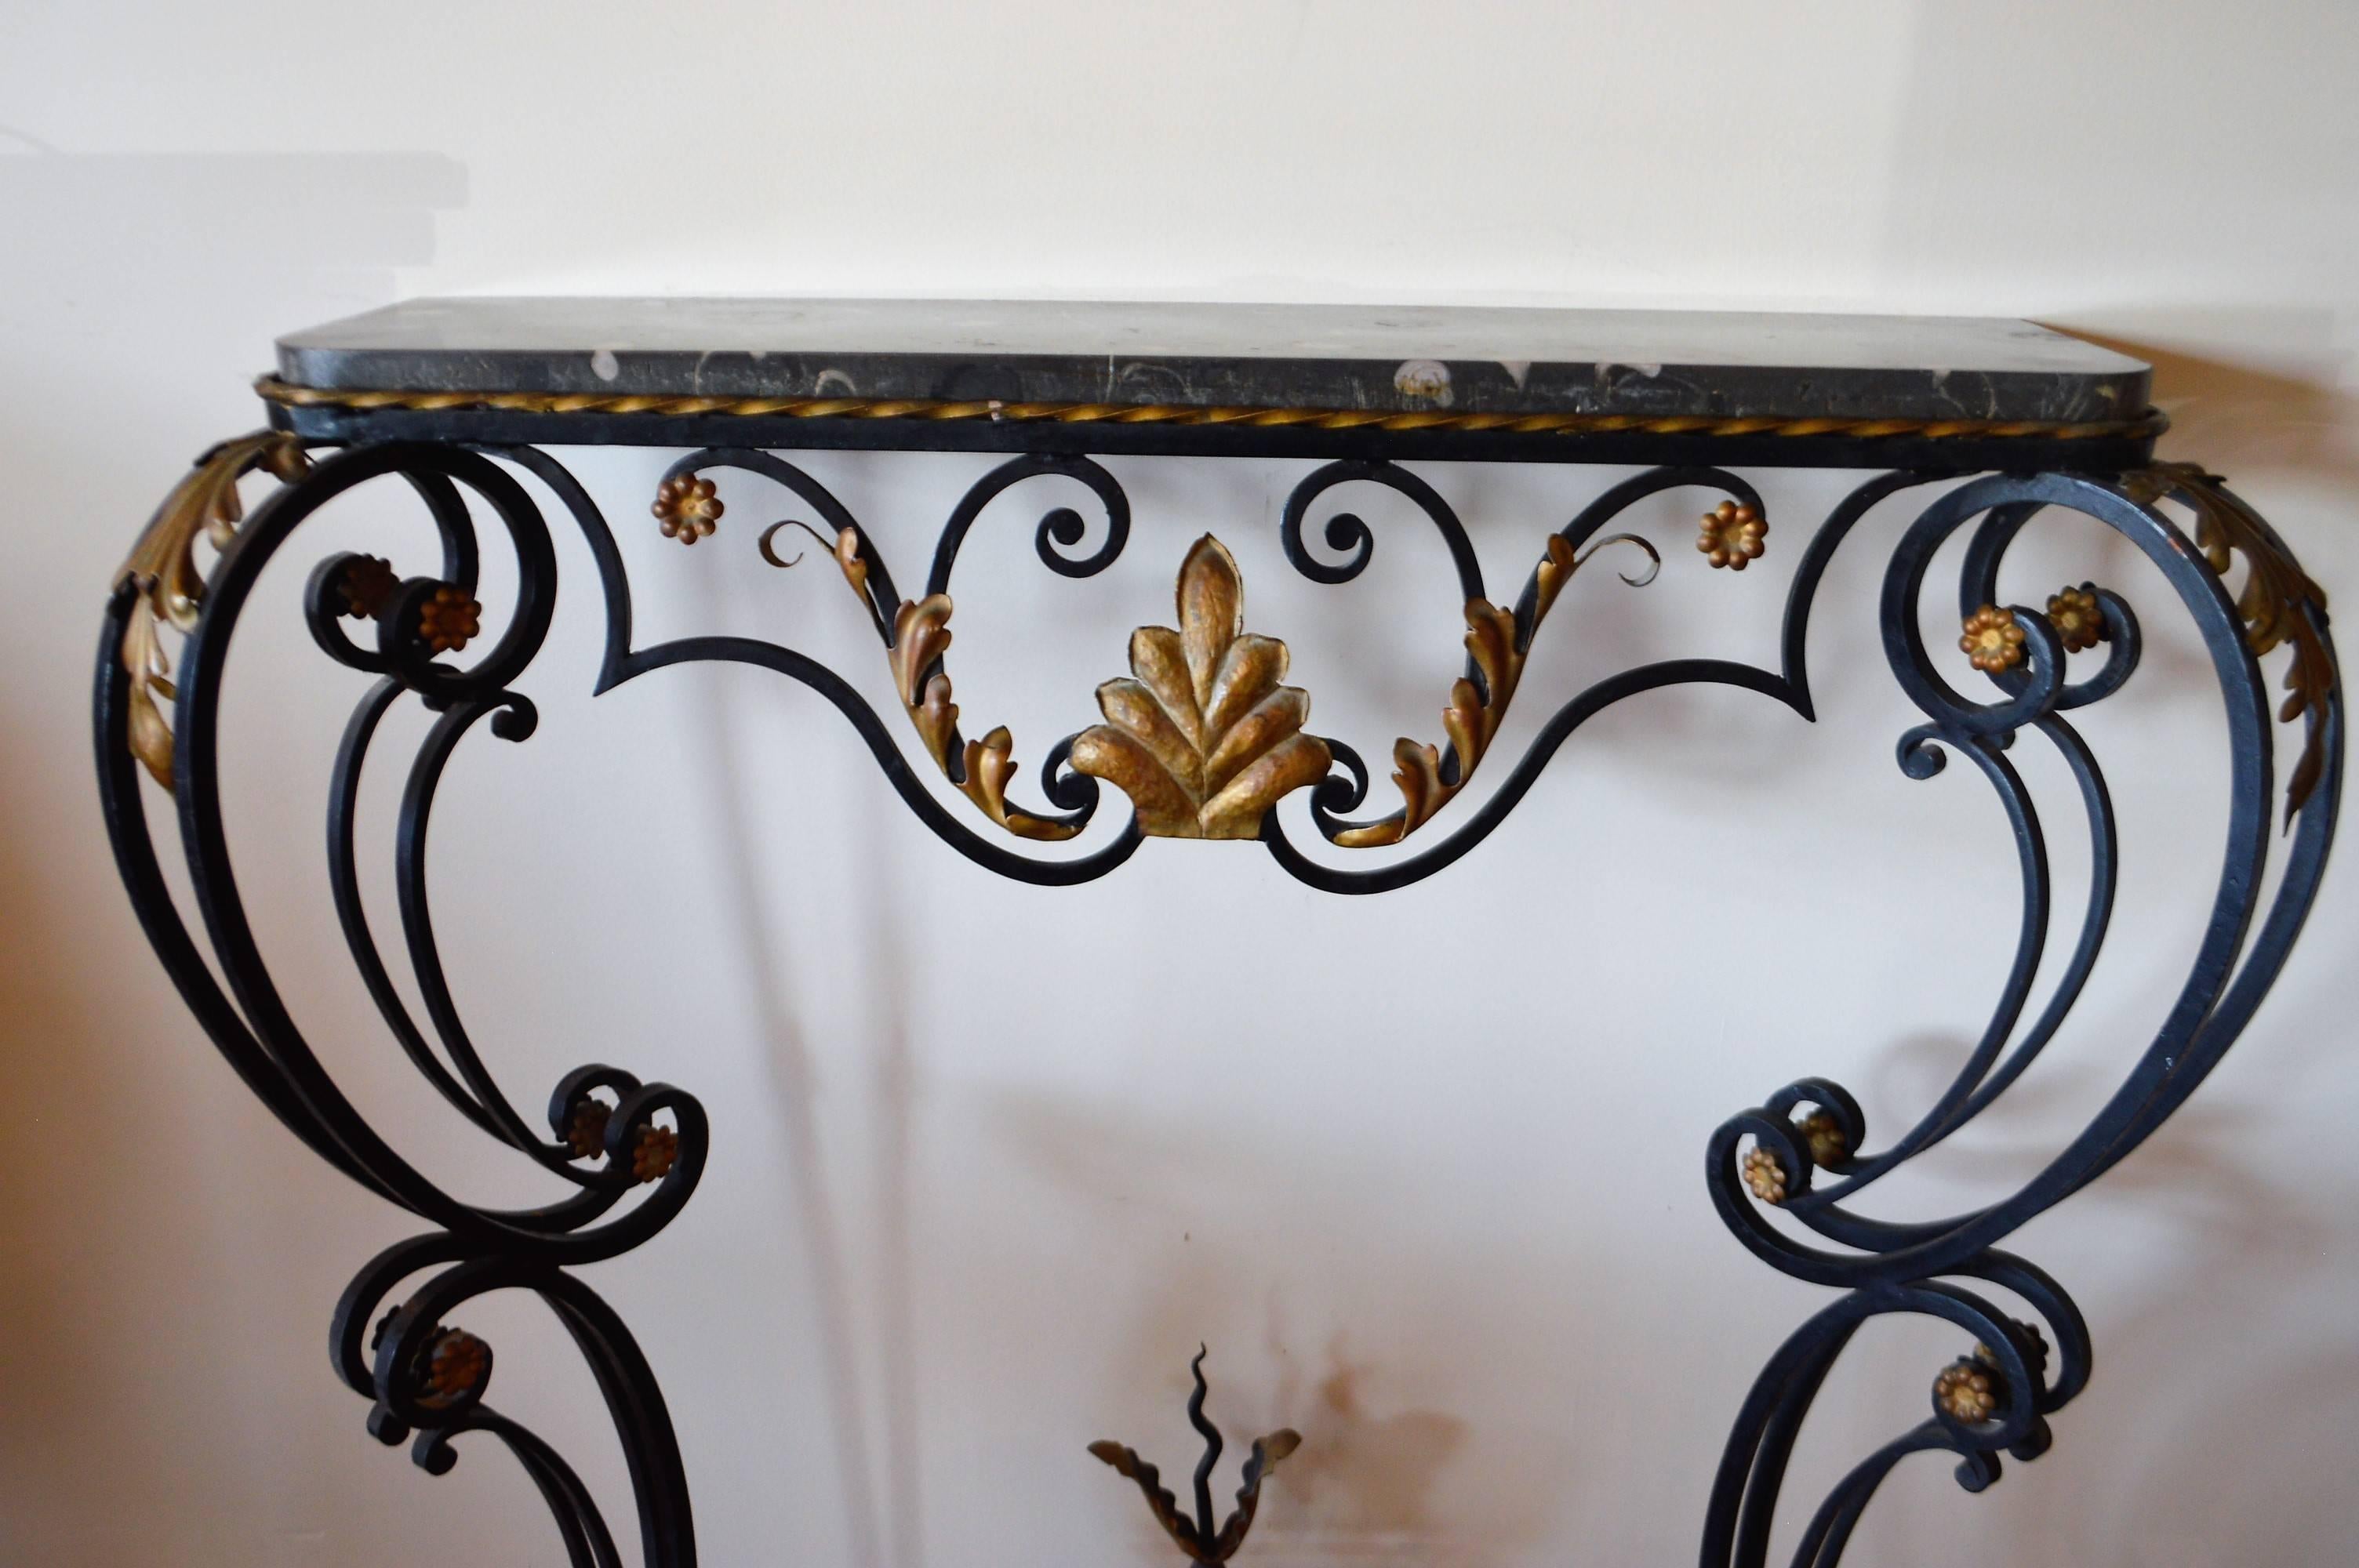 Louis XV style hand-forged with some gilded acanthus leave and flower design and dark grey marble top. Very Belle Époque stylish and perfect for space requiring shallow depth.